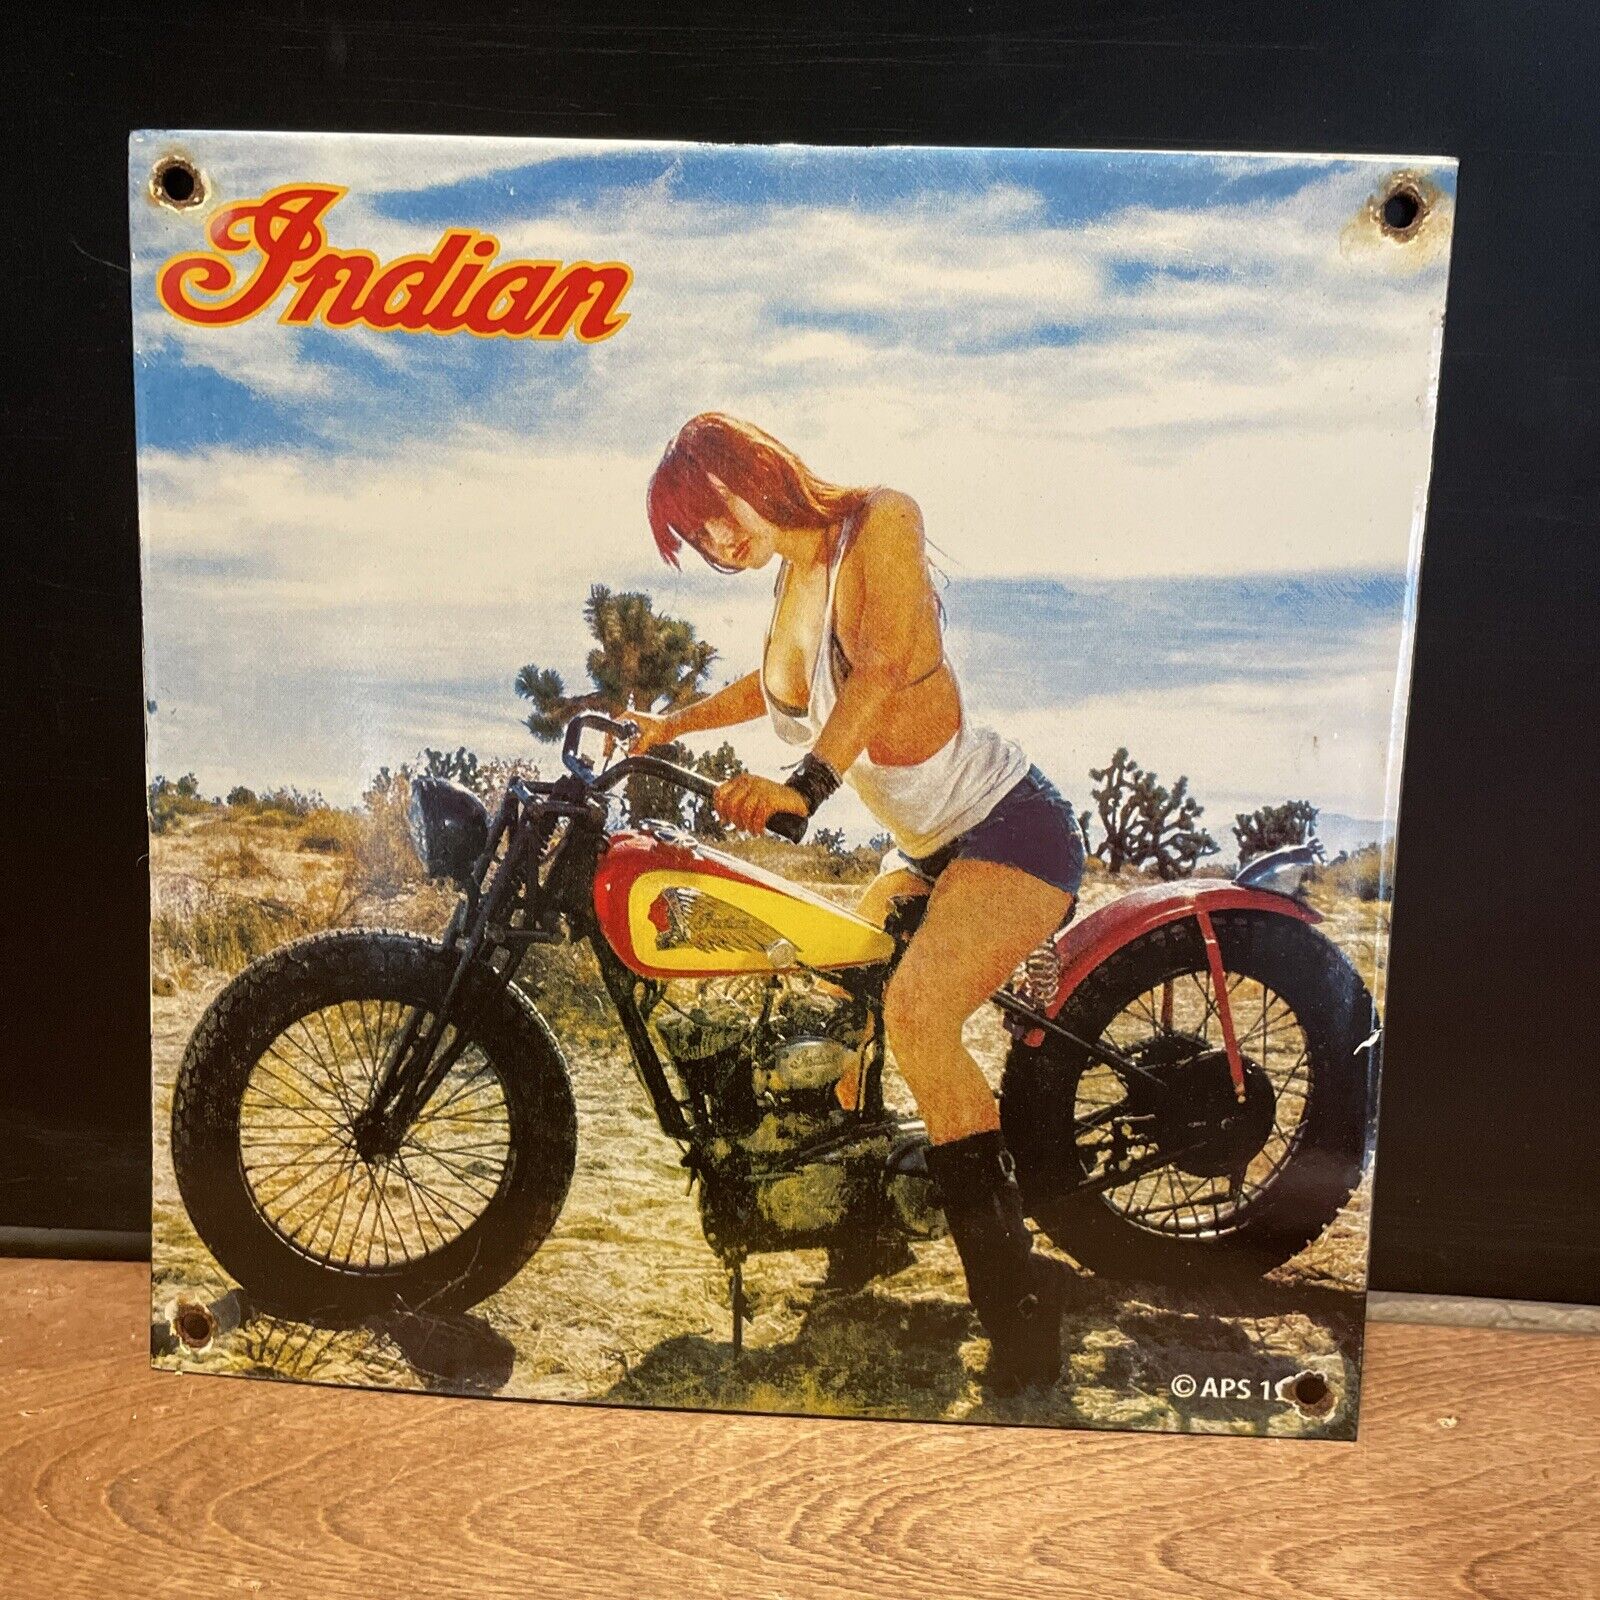 VINTAGE STYLE ''INDIAN'' MOTORCYCLES PUMP PLATE PORCELAIN SIGN 10X10 INCH